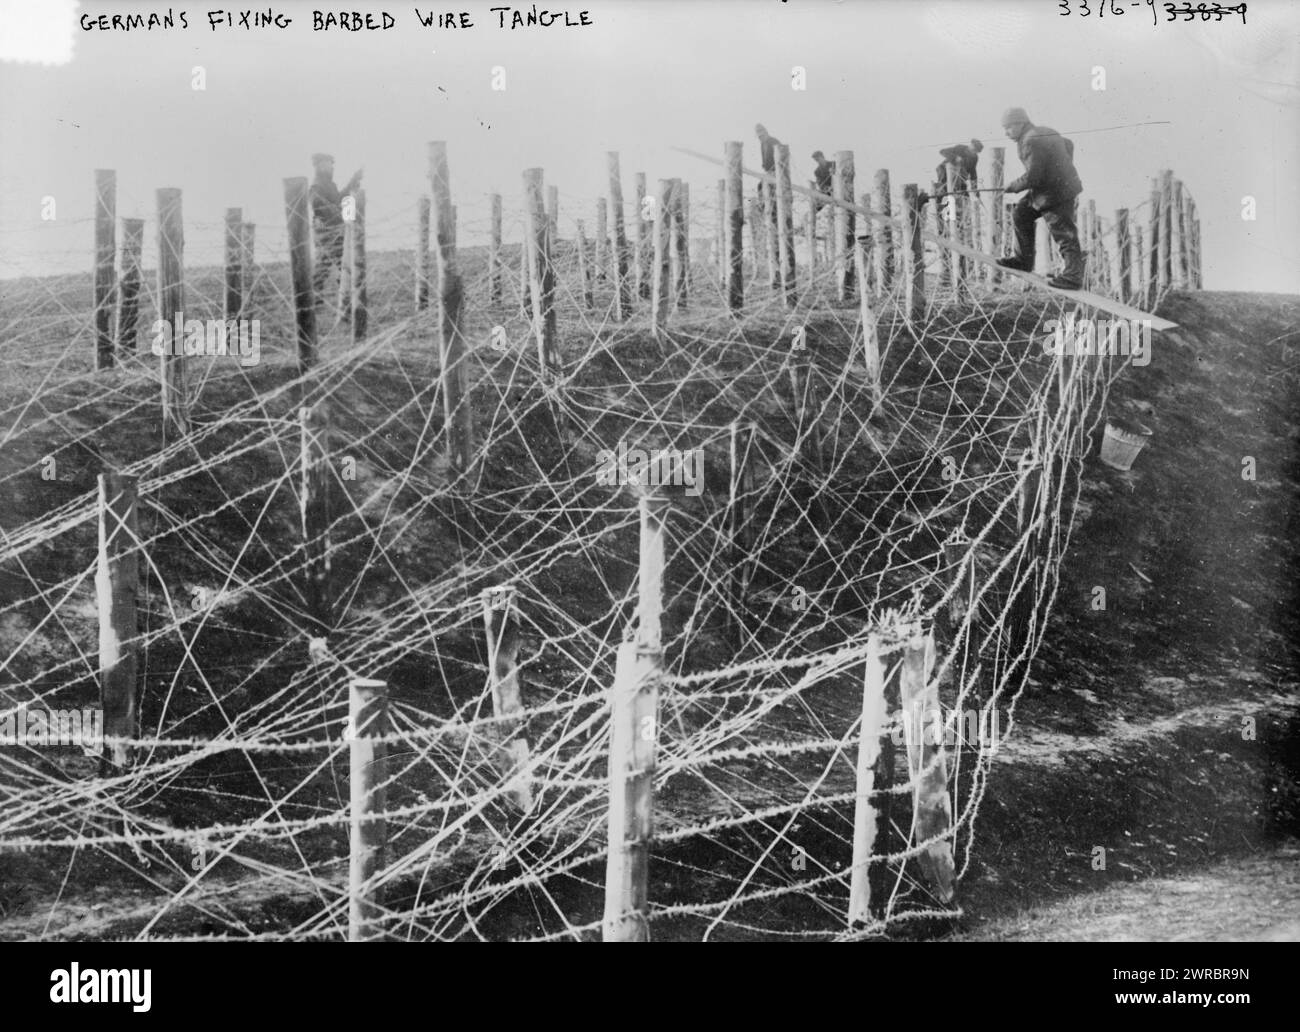 Germans fixing barbed wire tangle, Photograph shows German soldiers fixing a barbed wire entanglement during World War I., between ca. 1914 and ca. 1915, World War, 1914-1918, Glass negatives, 1 negative: glass Stock Photo